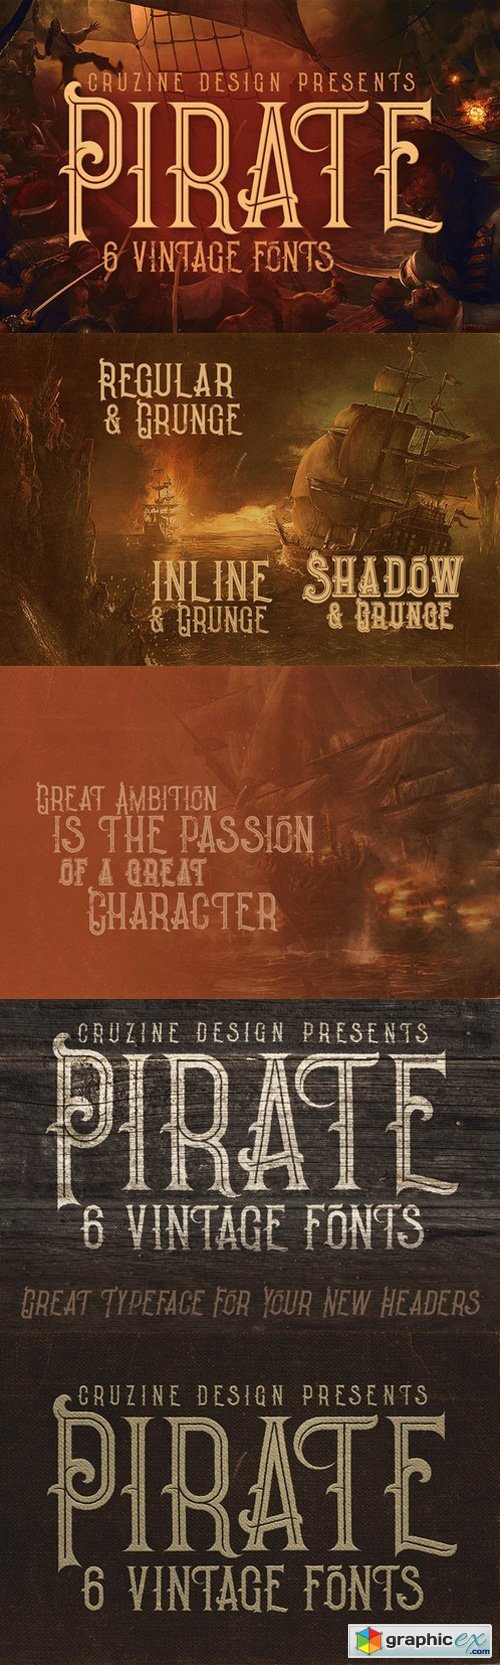 Pirate- Vintage Style Font 